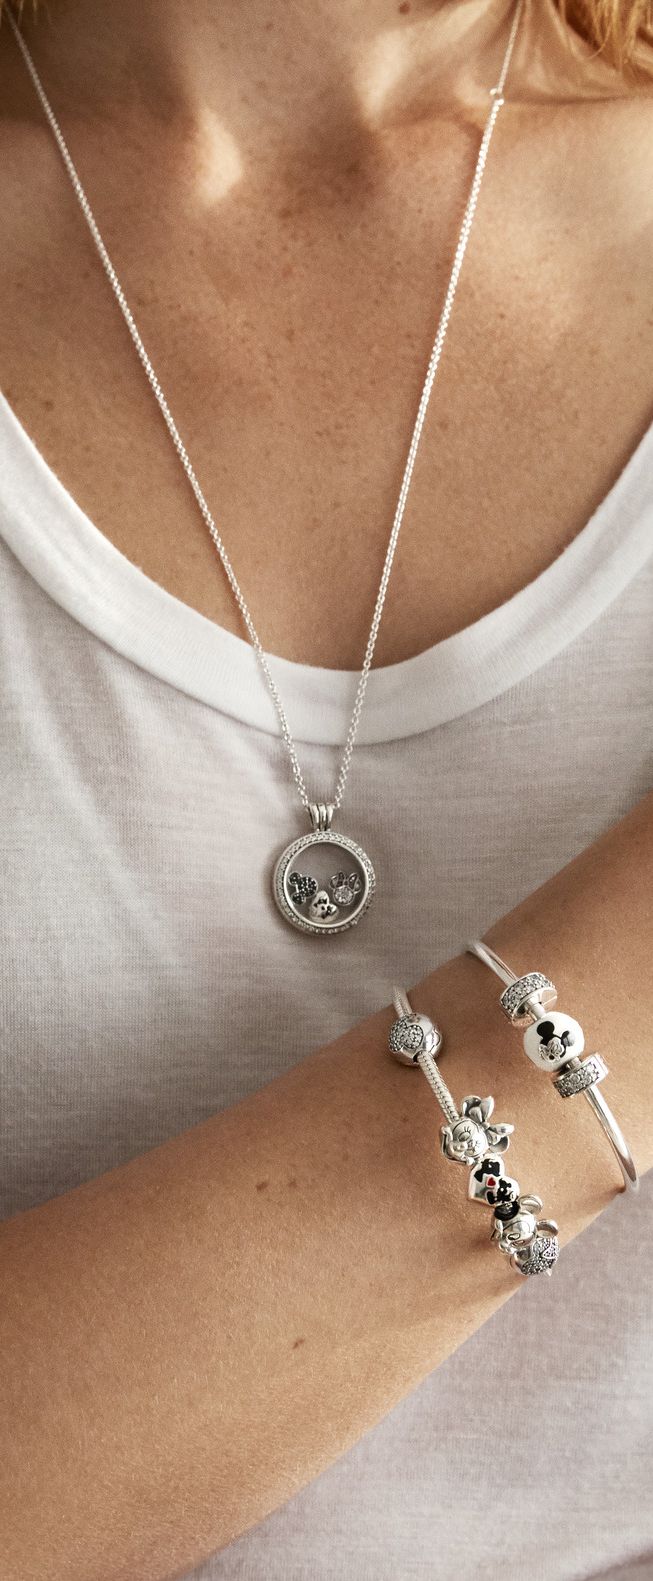 2018 Silver & Gold Jewelry Collection | Disney In 2019 | Pandora With 2020 Pandora Moments Medium O Pendant Necklaces (View 3 of 25)